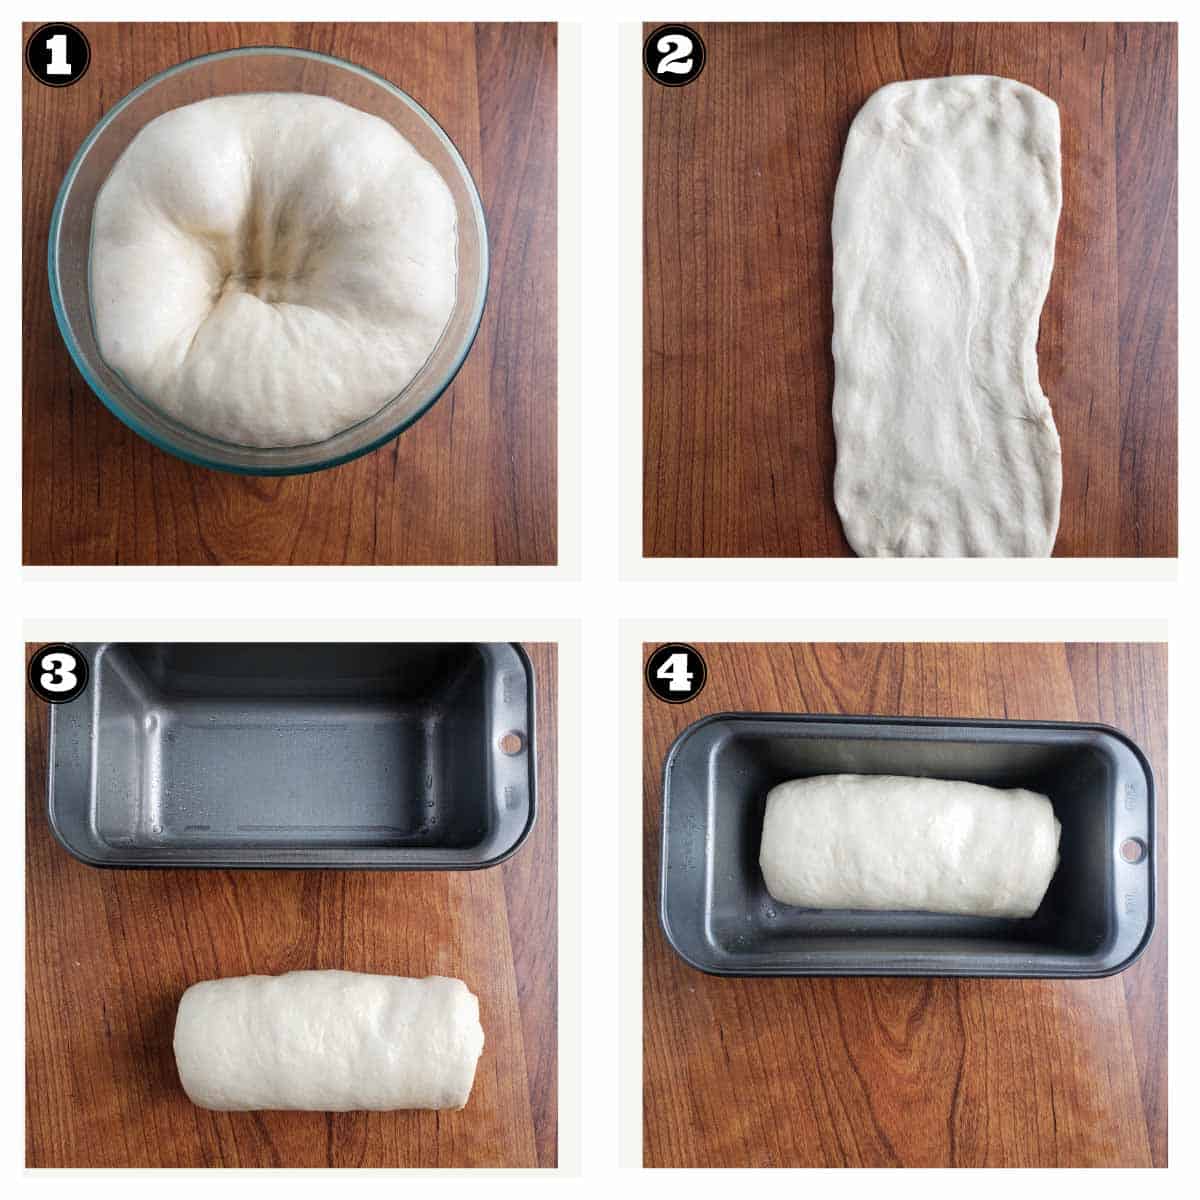 images showing steps involved in shaping the mini loaf for baking in an ar fryer